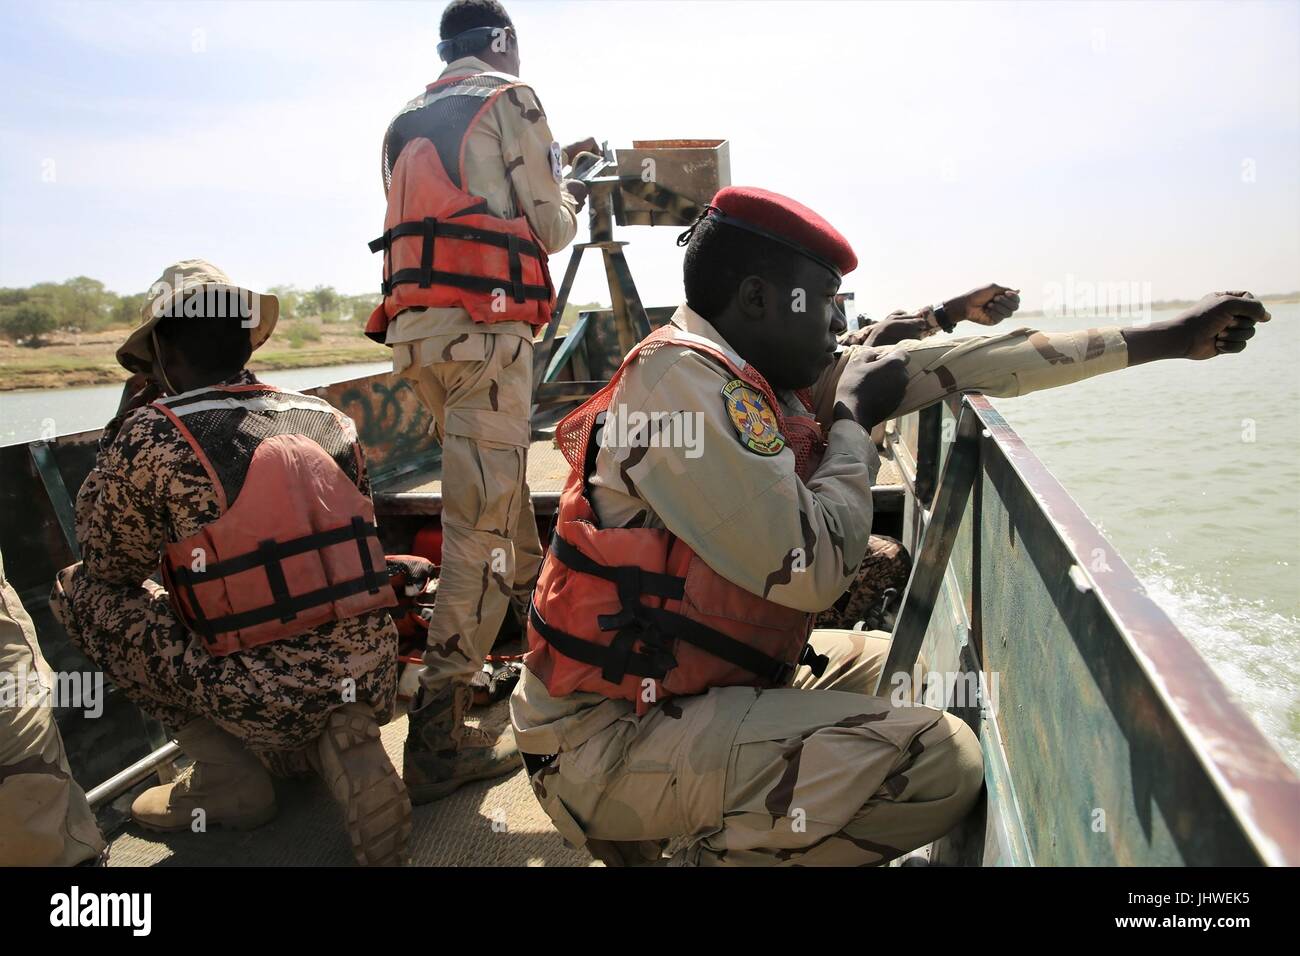 Chadian soldiers simulate holding weapons as they prepare for a beach infiltration during maritime training on the Chari River for exercise Flintlock March 3, 2017 in NÕDjamena, Chad.    (photo by Terrance Payton via Planetpix) Stock Photo